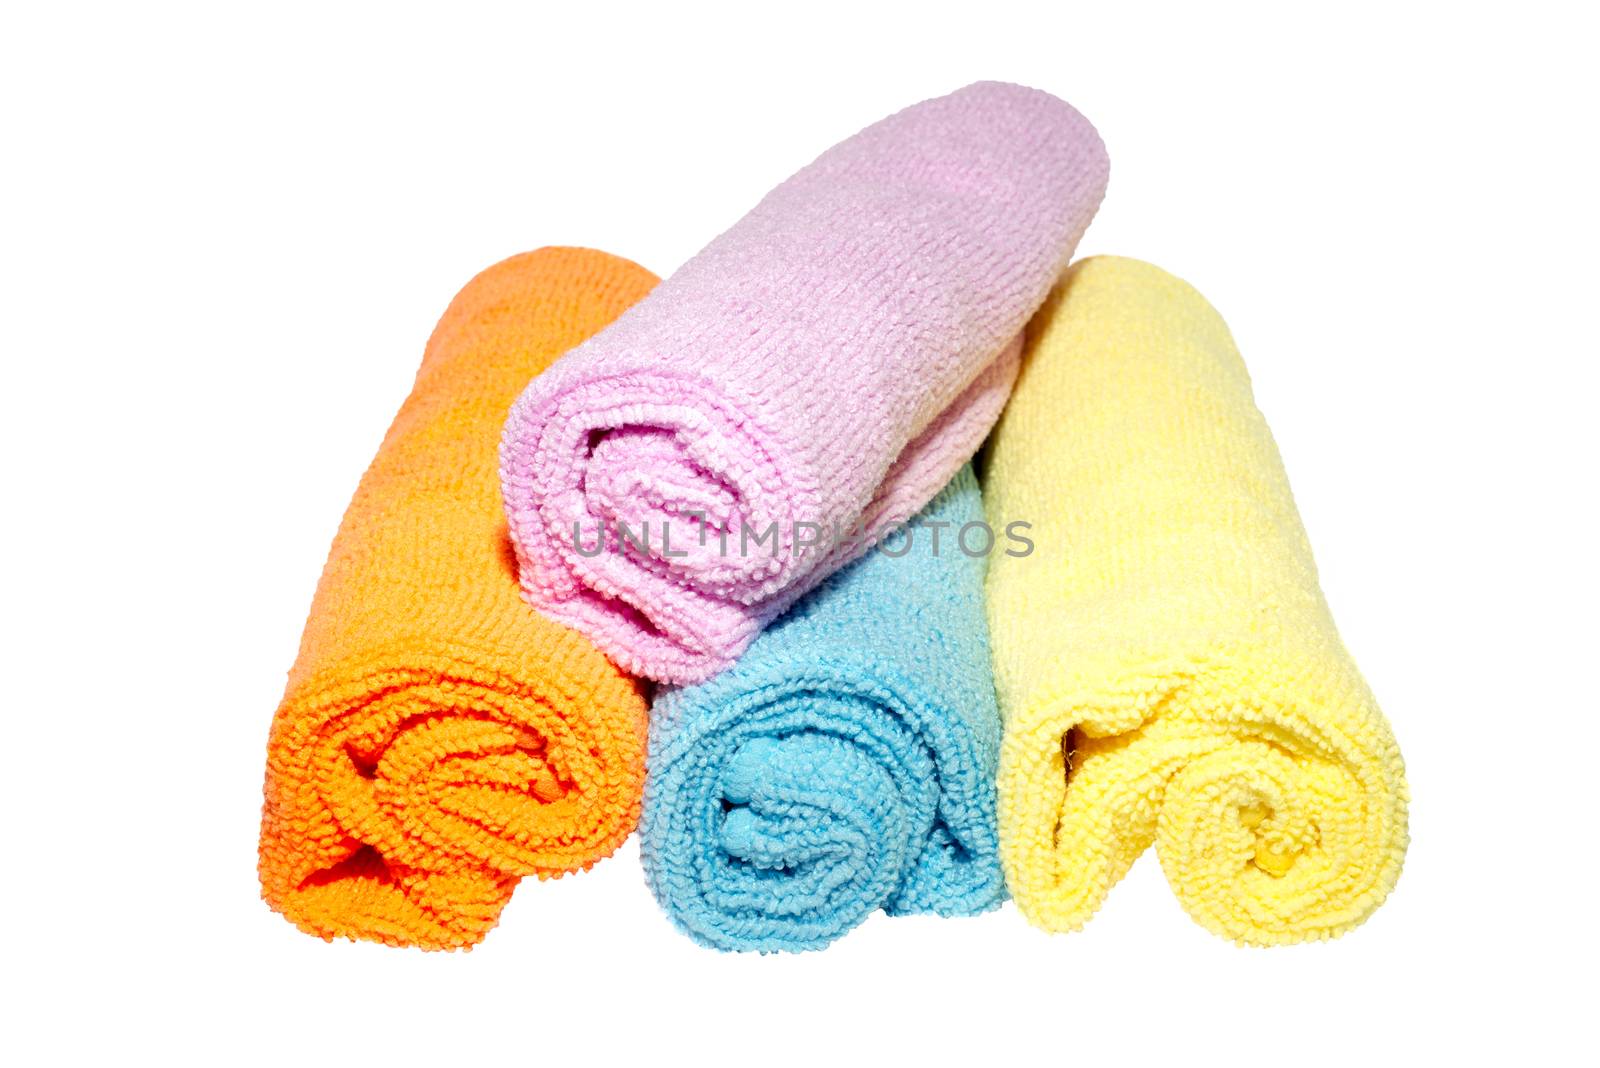 4 facecloth rolls various shades by morrbyte